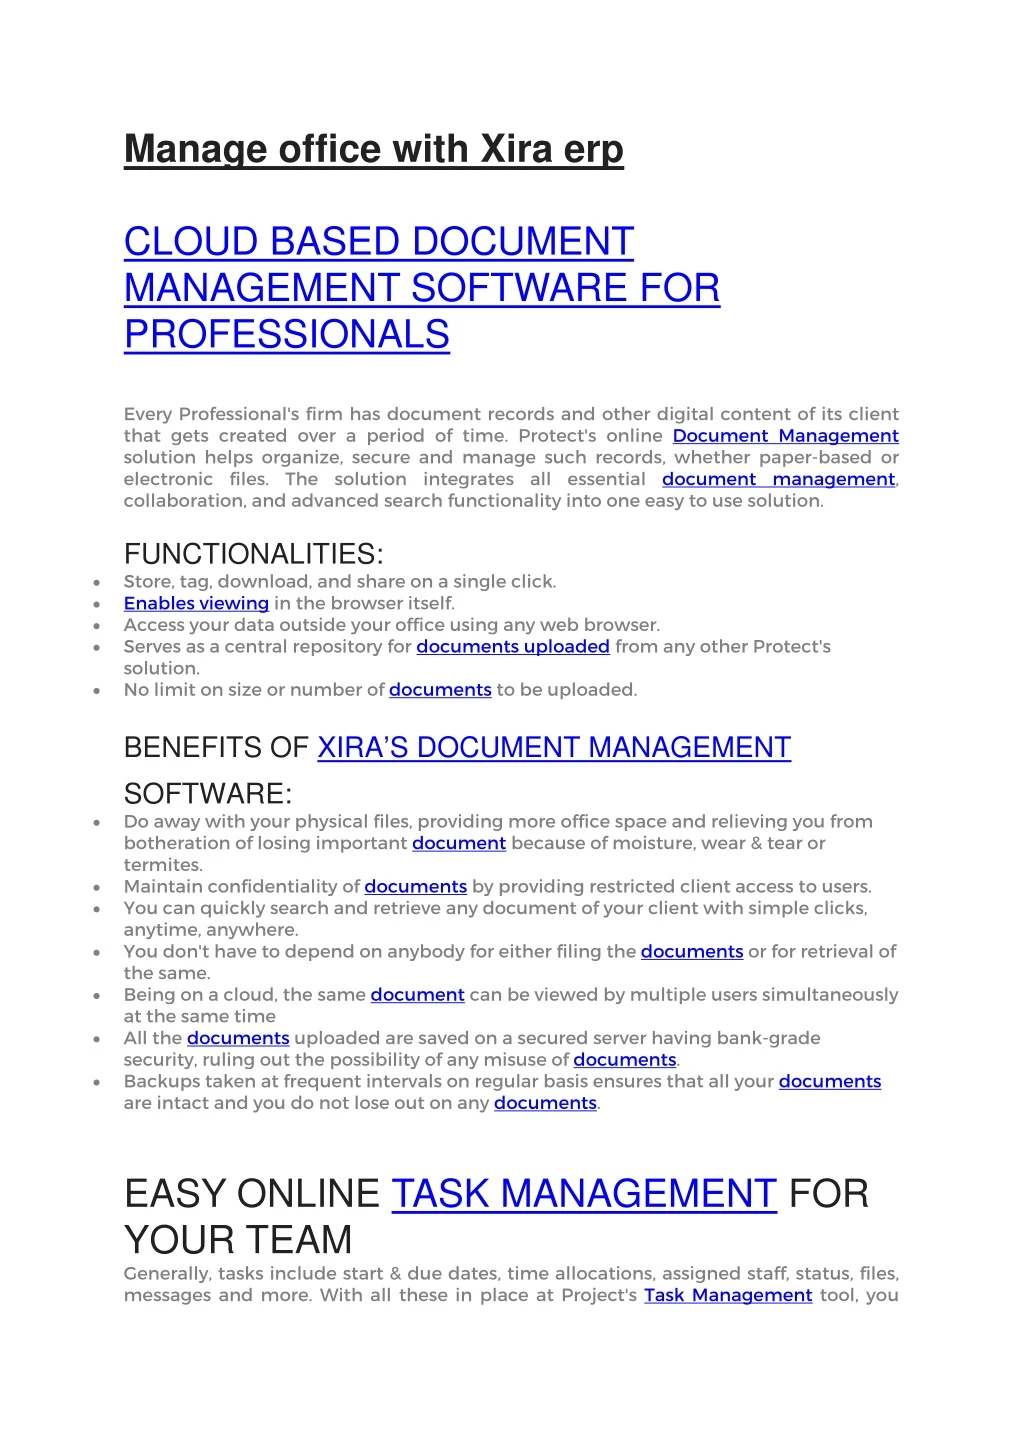 manage office with xira erp cloud based document